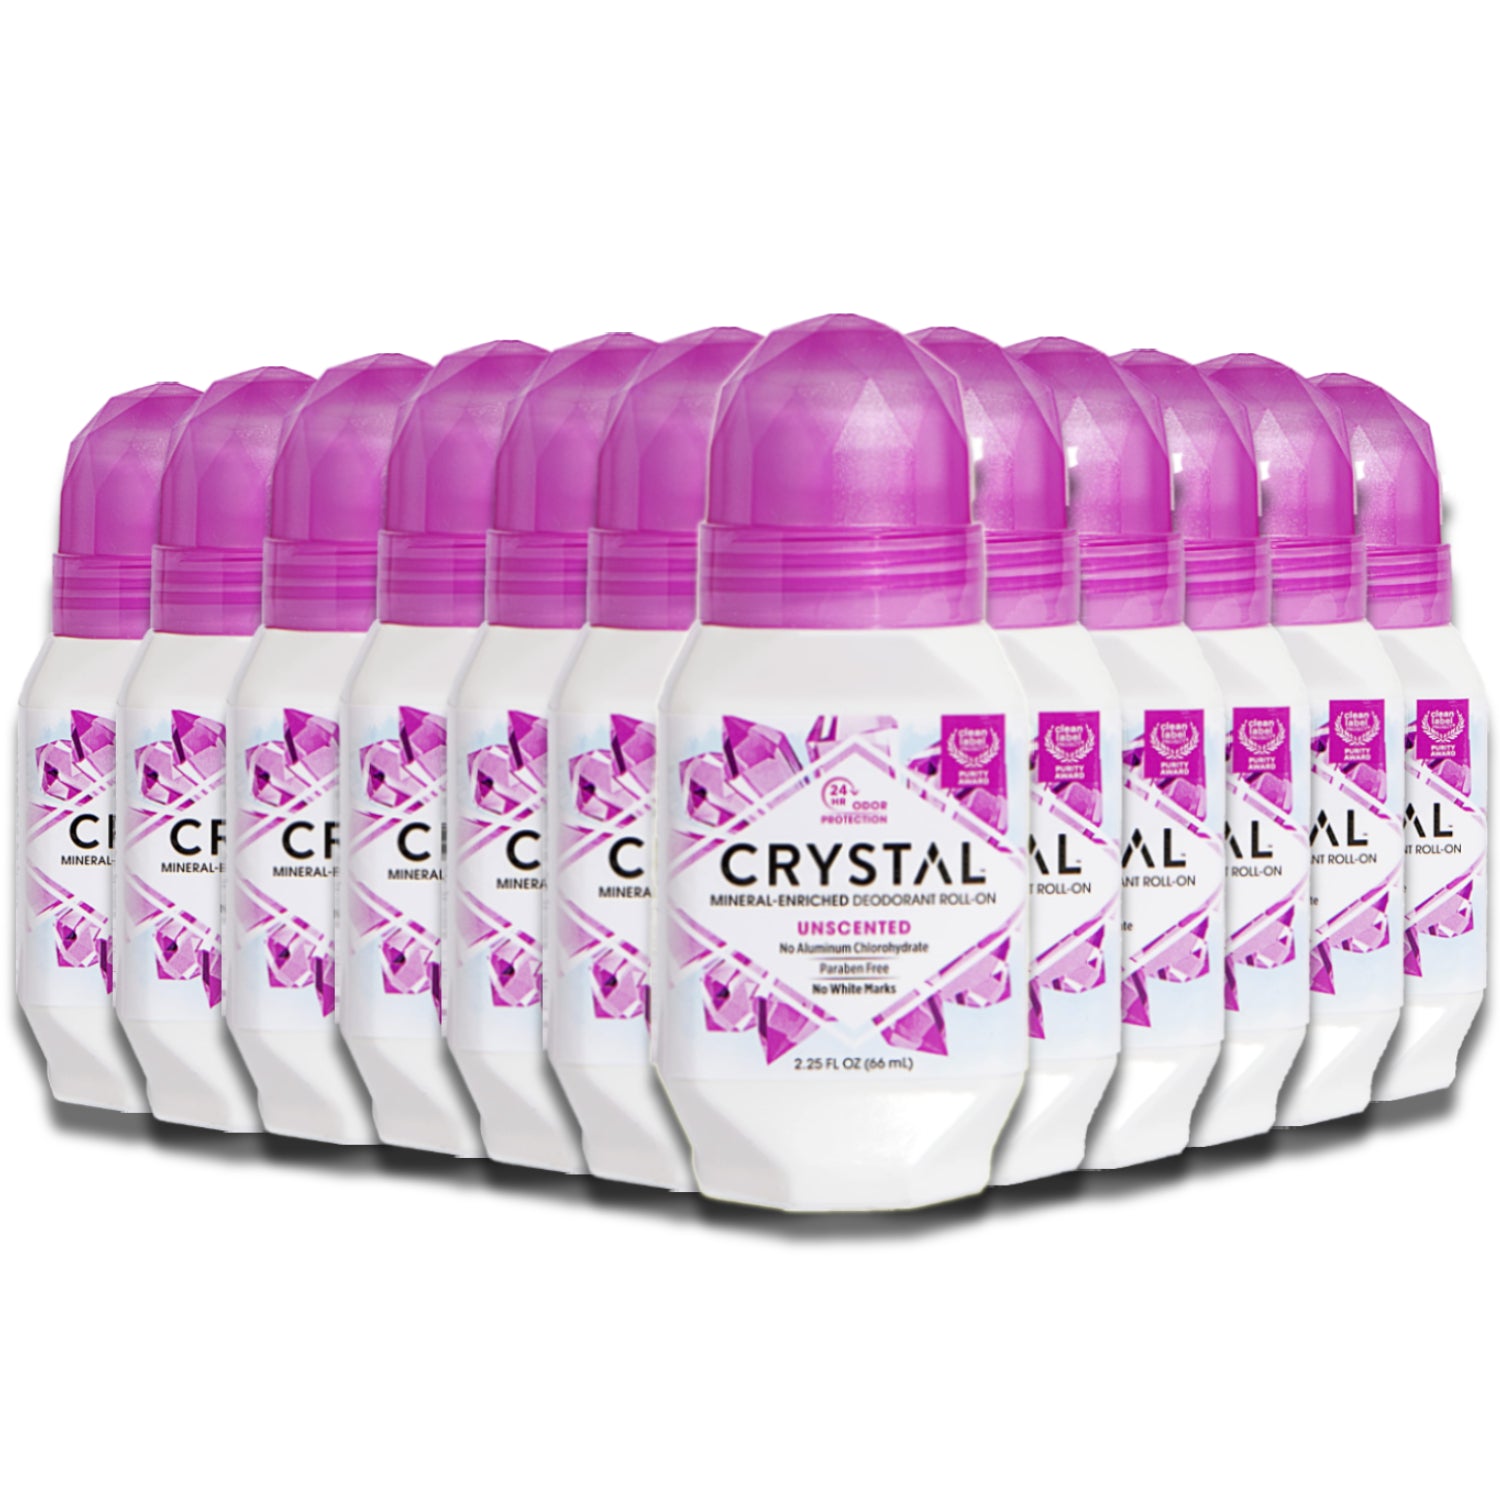 Crystal Mineral Deodorant On 2.25 oz - 12 Pack – Contarmarket